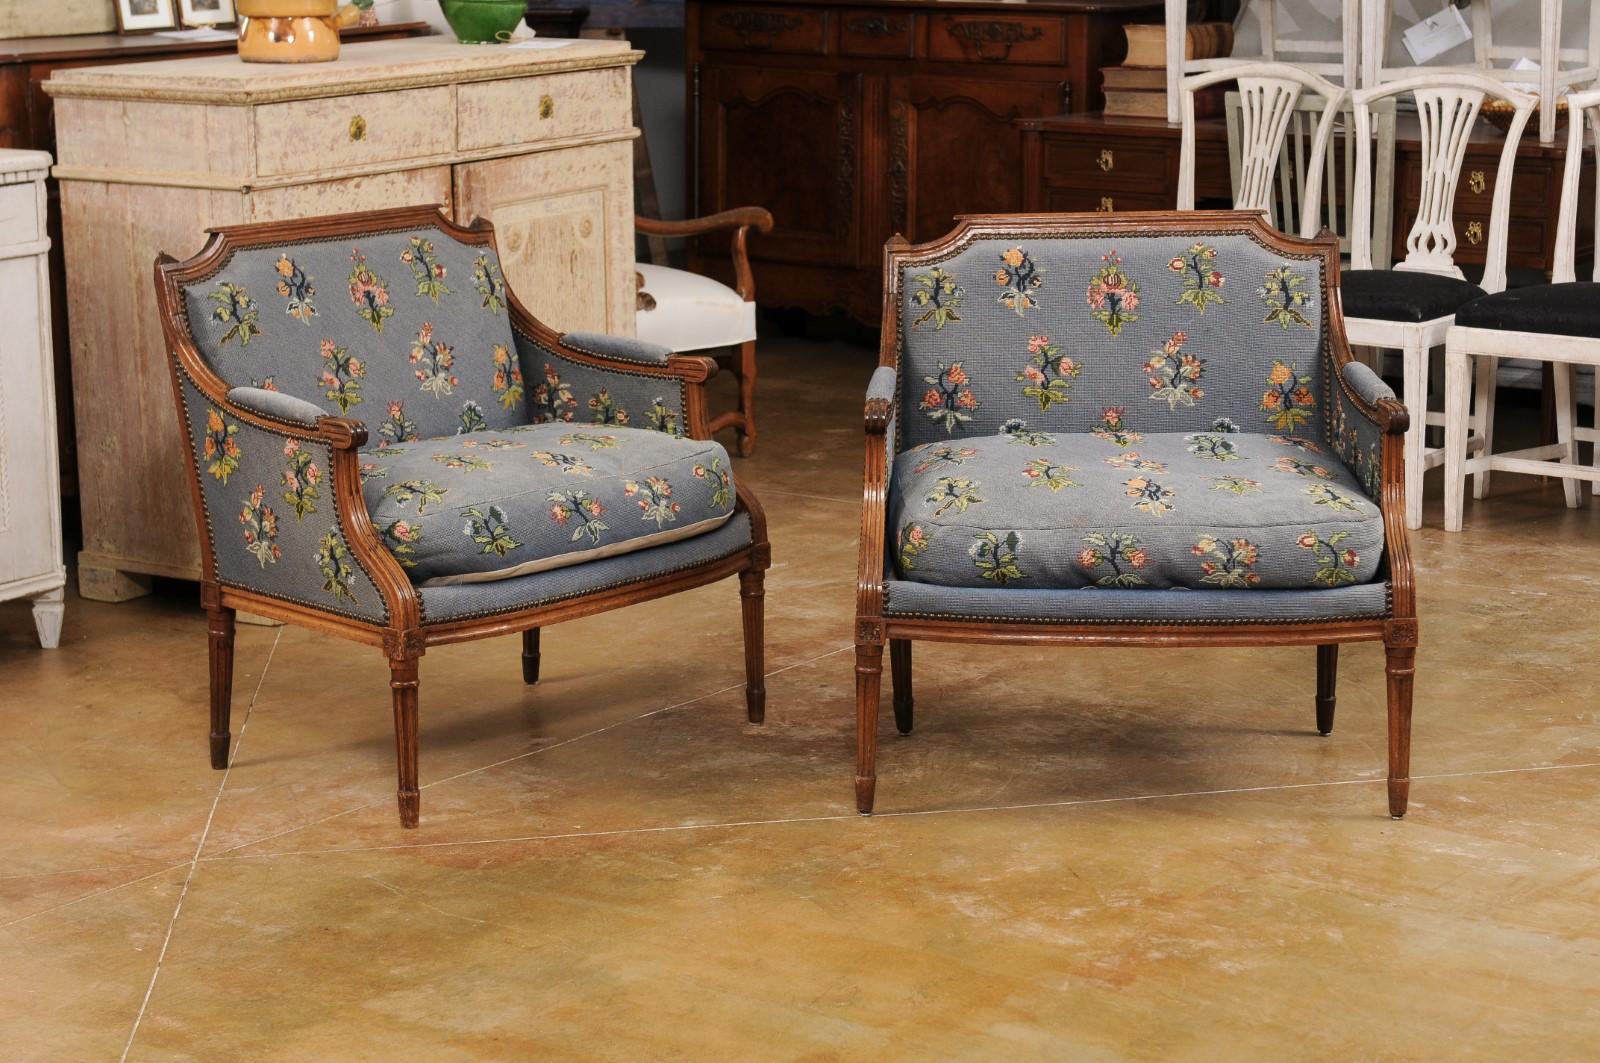 19th Century Pair of French Louis XVI Period 1790s Bergère Marquise Chairs with Upholstery For Sale